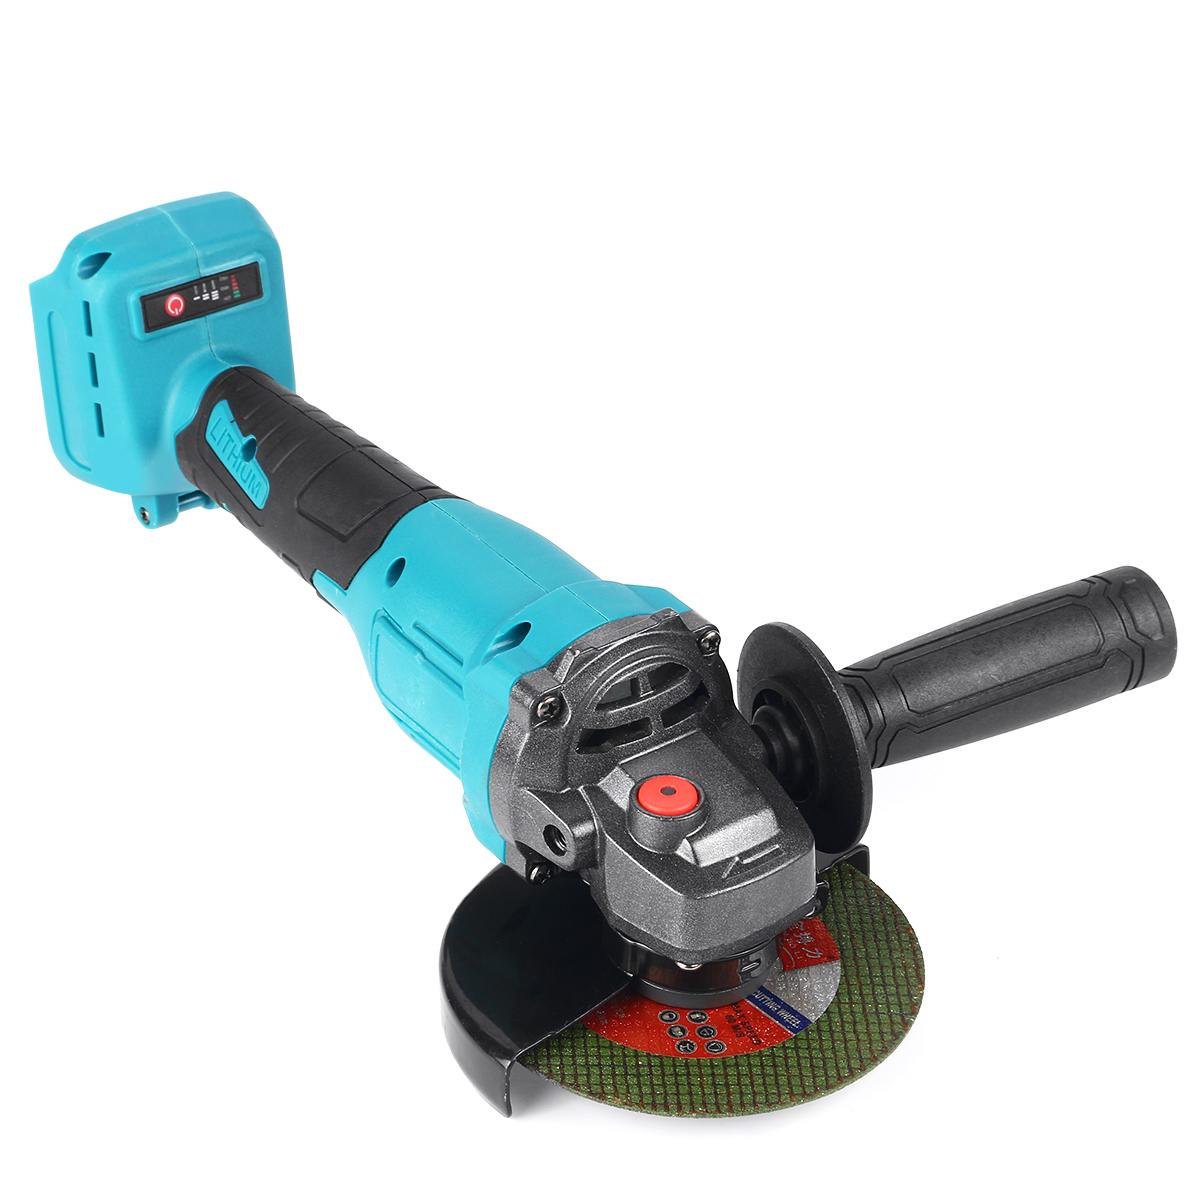 125/105mm Brushless Electric Angle Grinder Grinding Machine 20000r/mi Cordless DIY Woodworking Power Tool For 18V Makita Battery